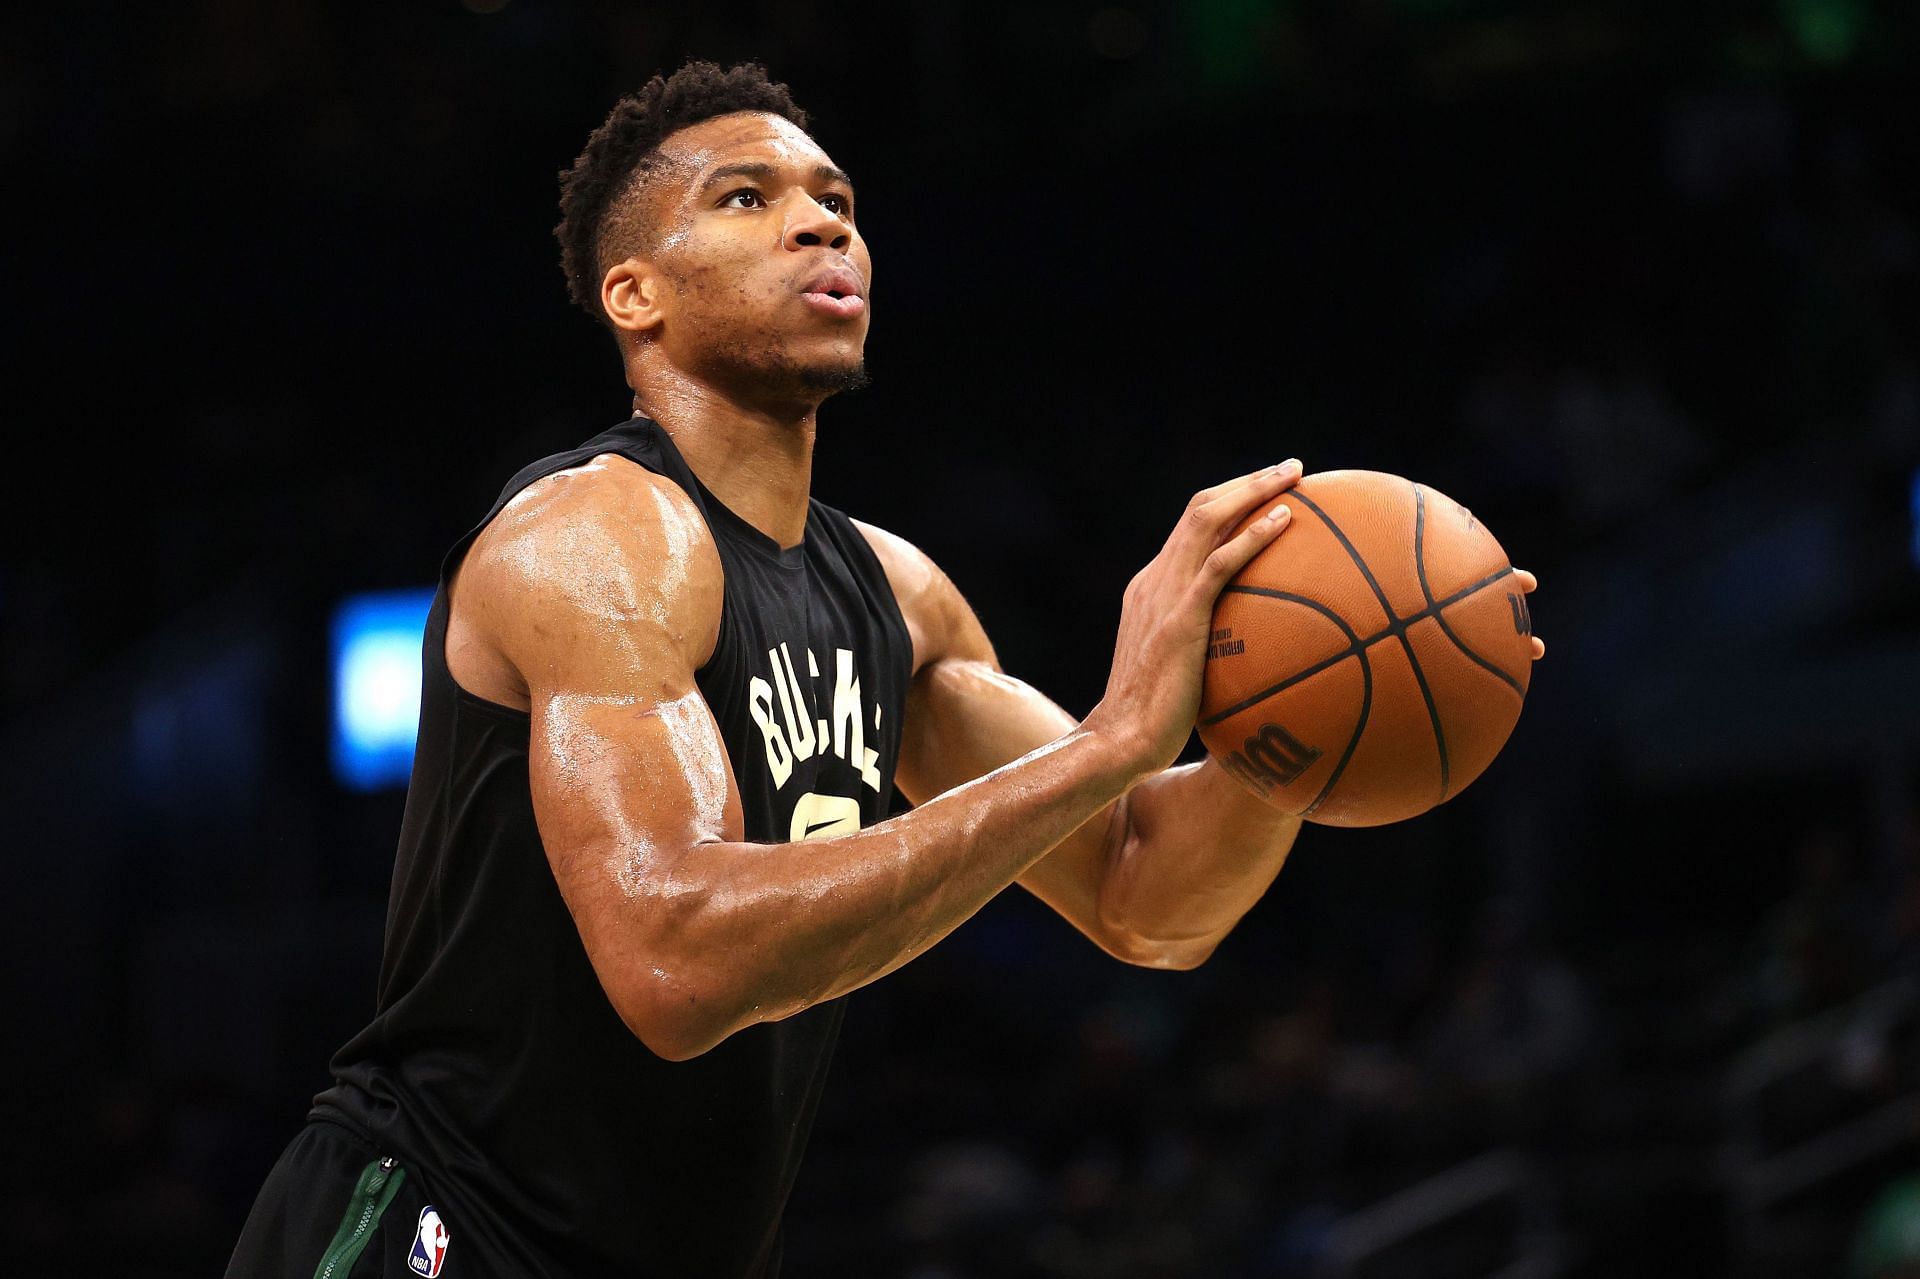 Giannis Antetokounmpo of the Milwaukee Bucks practices ahead of the matchup against Boston